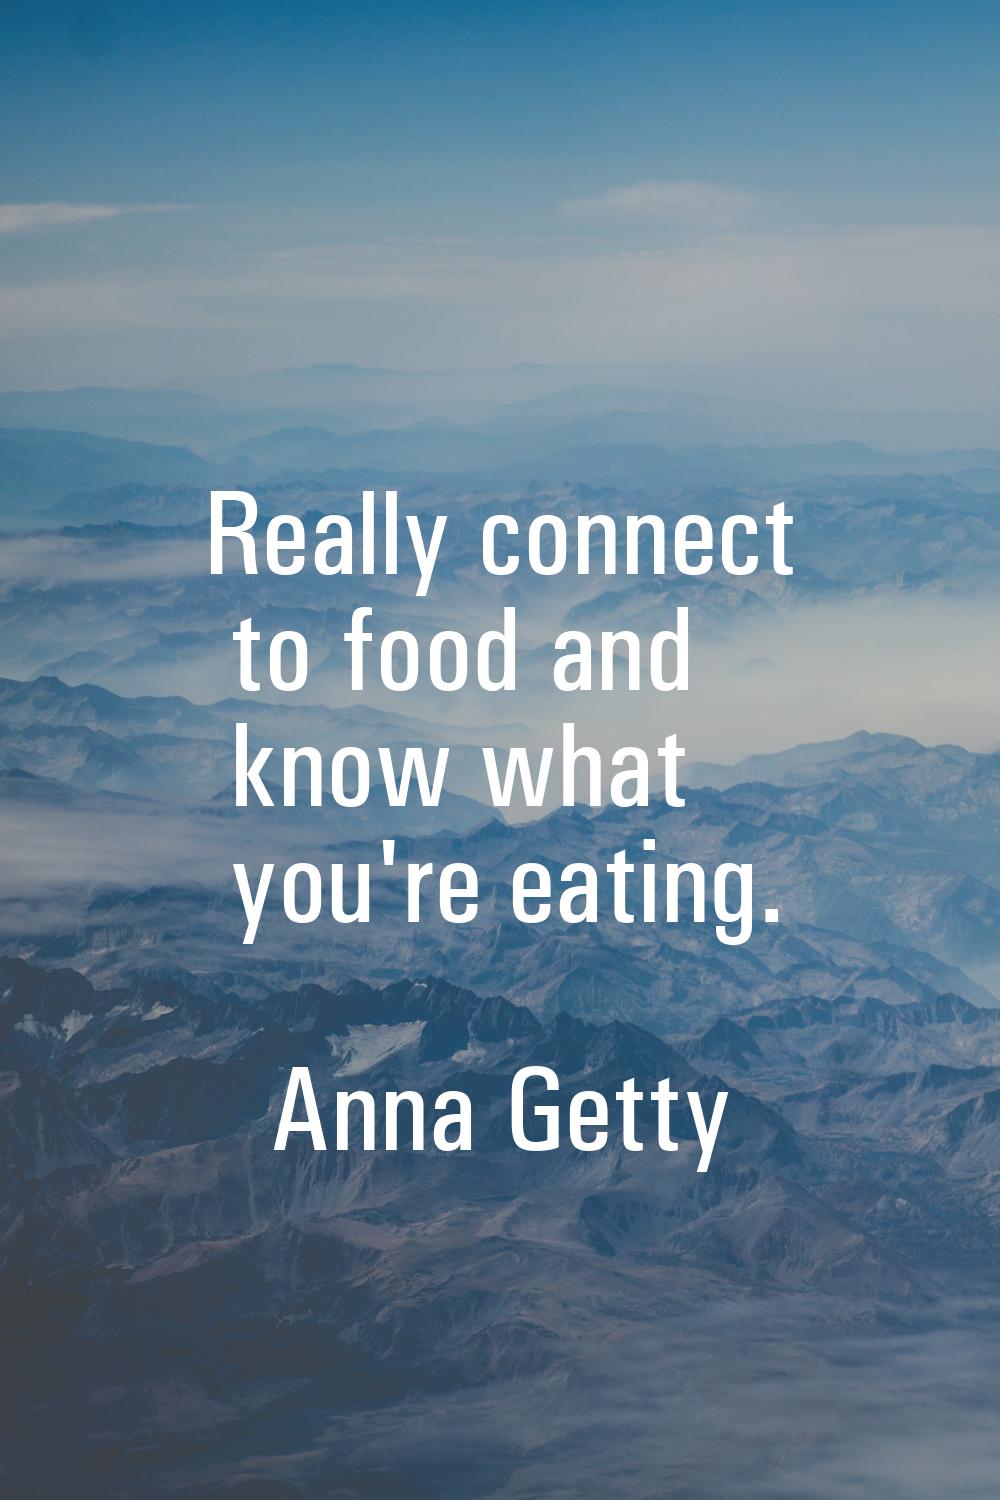 Really connect to food and know what you're eating.